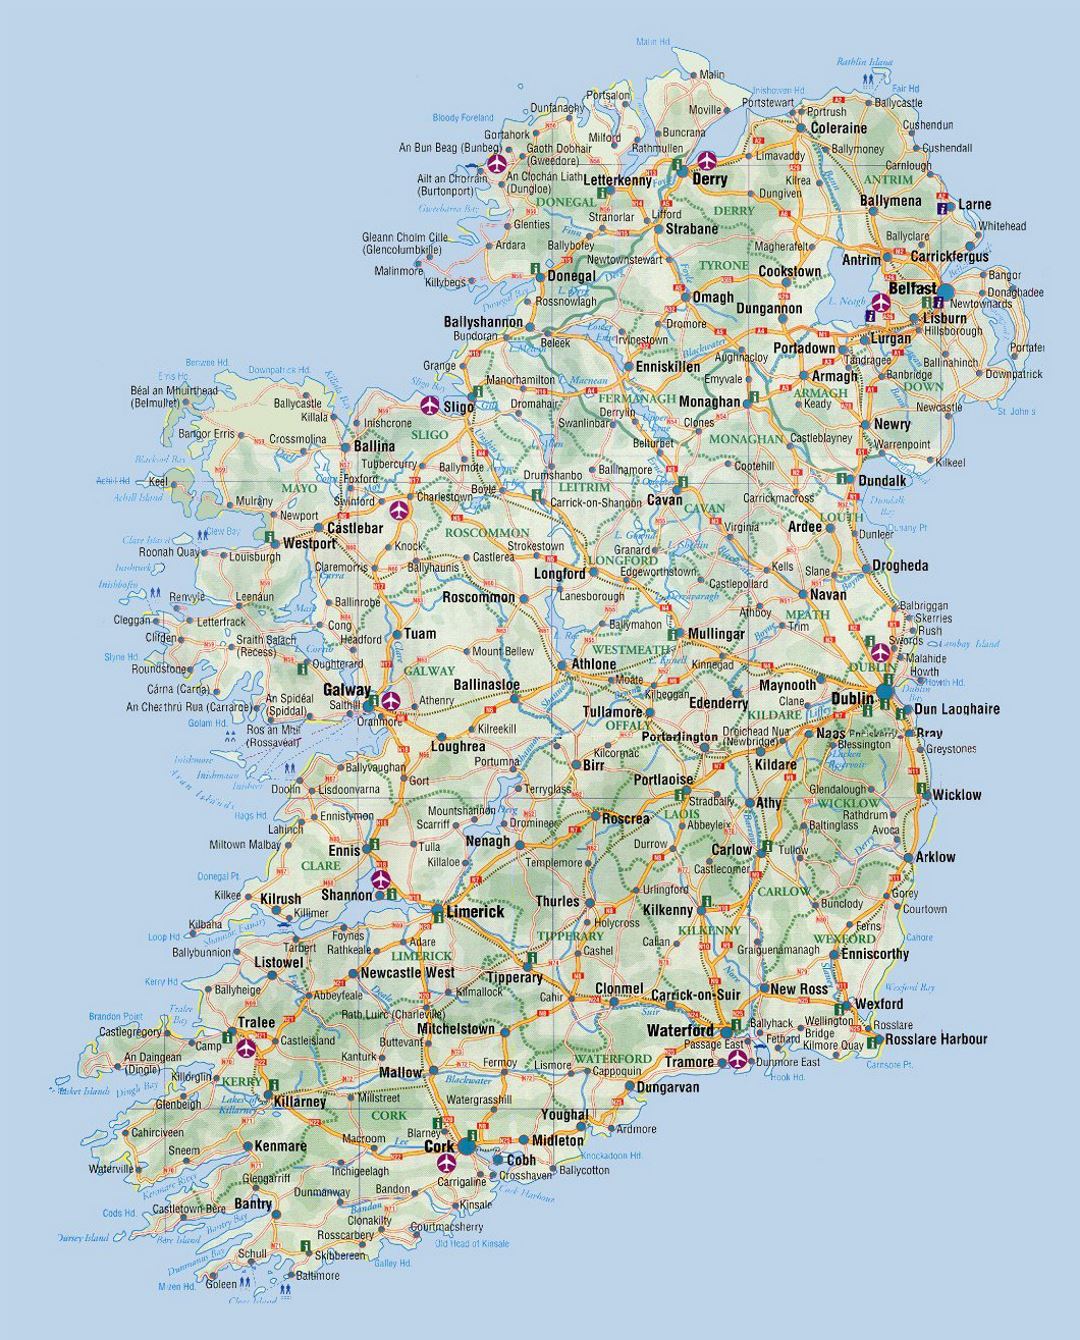 Detailed elevation and road map of Ireland with cities and airports